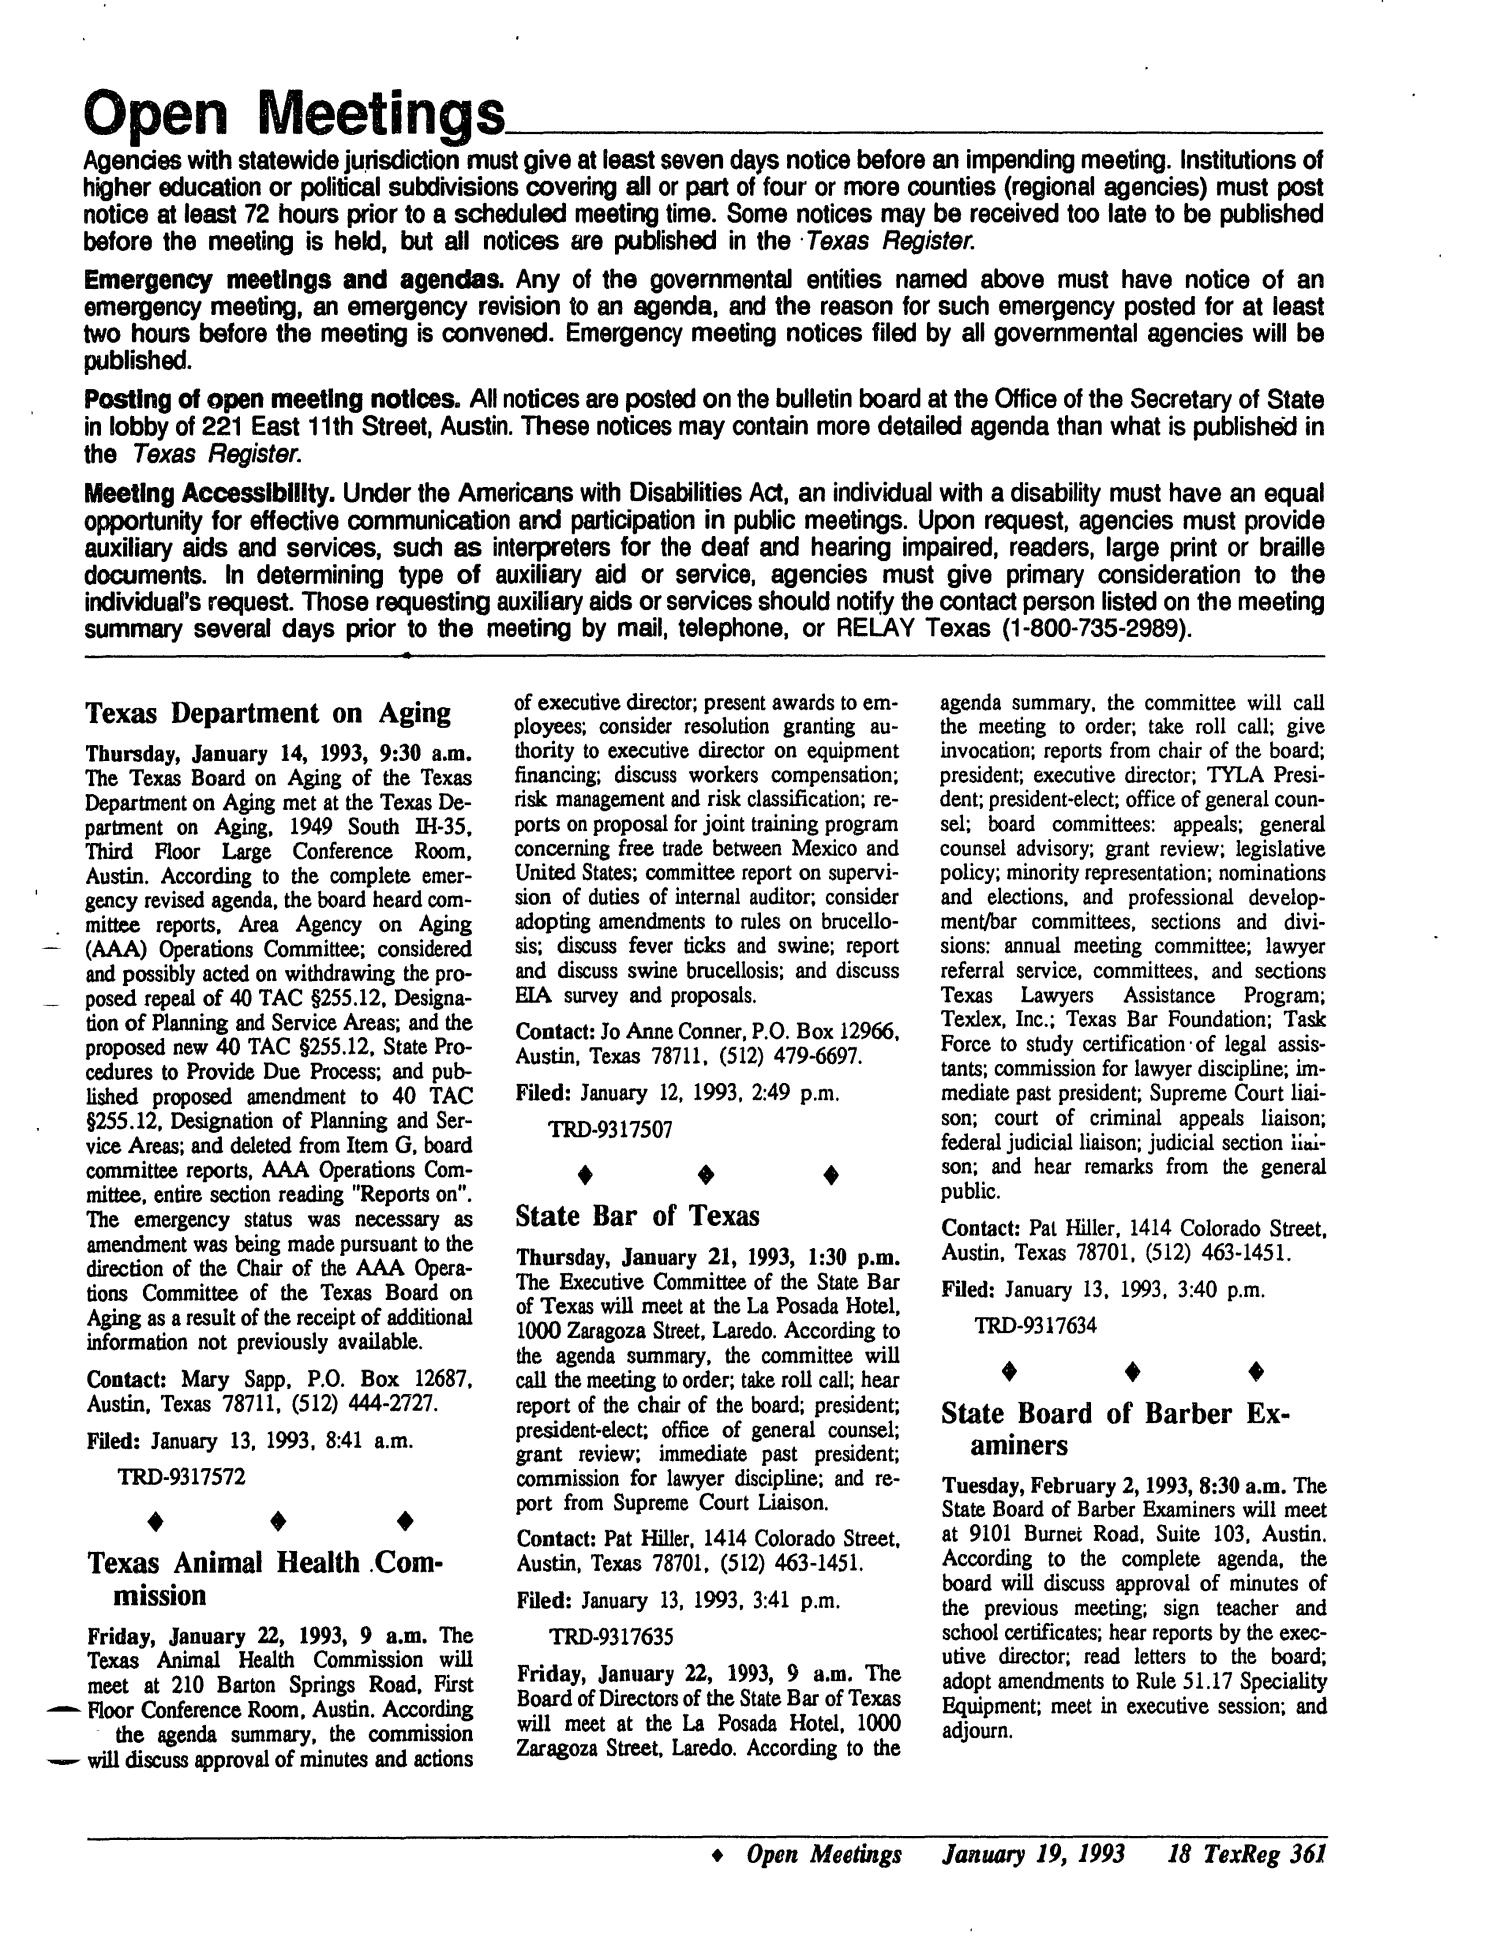 Texas Register, Volume 18, Number 6, Pages 339-381, January 19, 1993
                                                
                                                    361
                                                